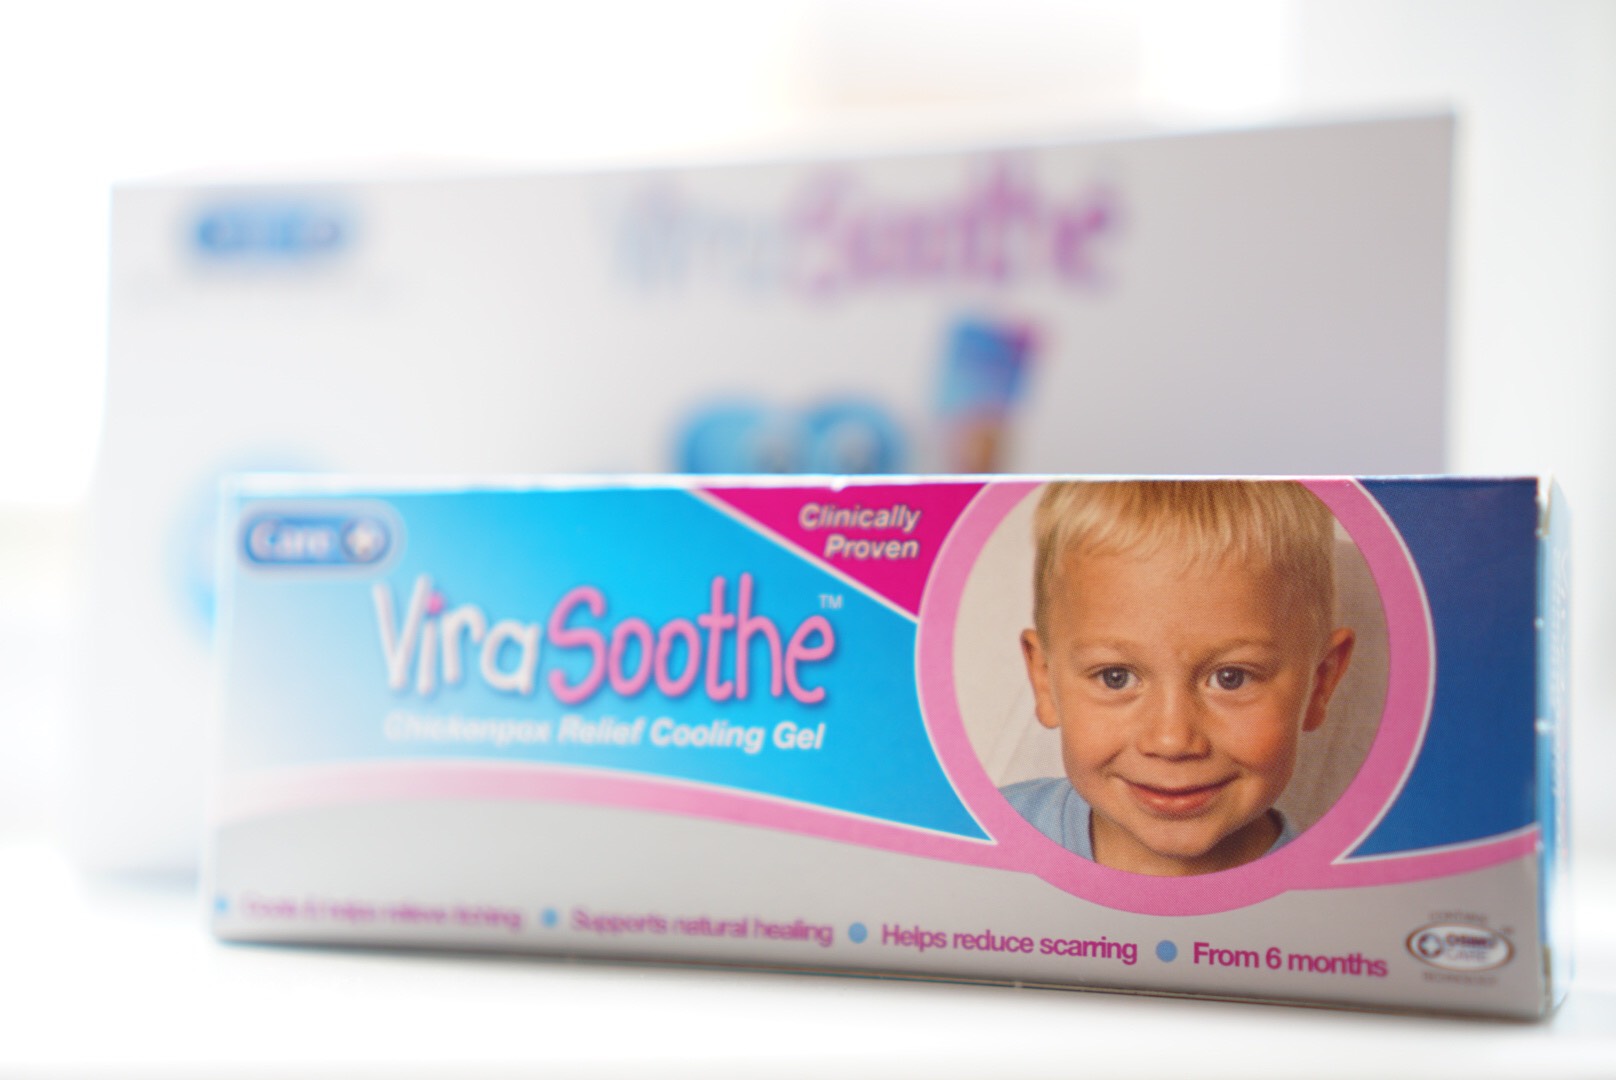 Care ViraSoothe relieving chickenpox